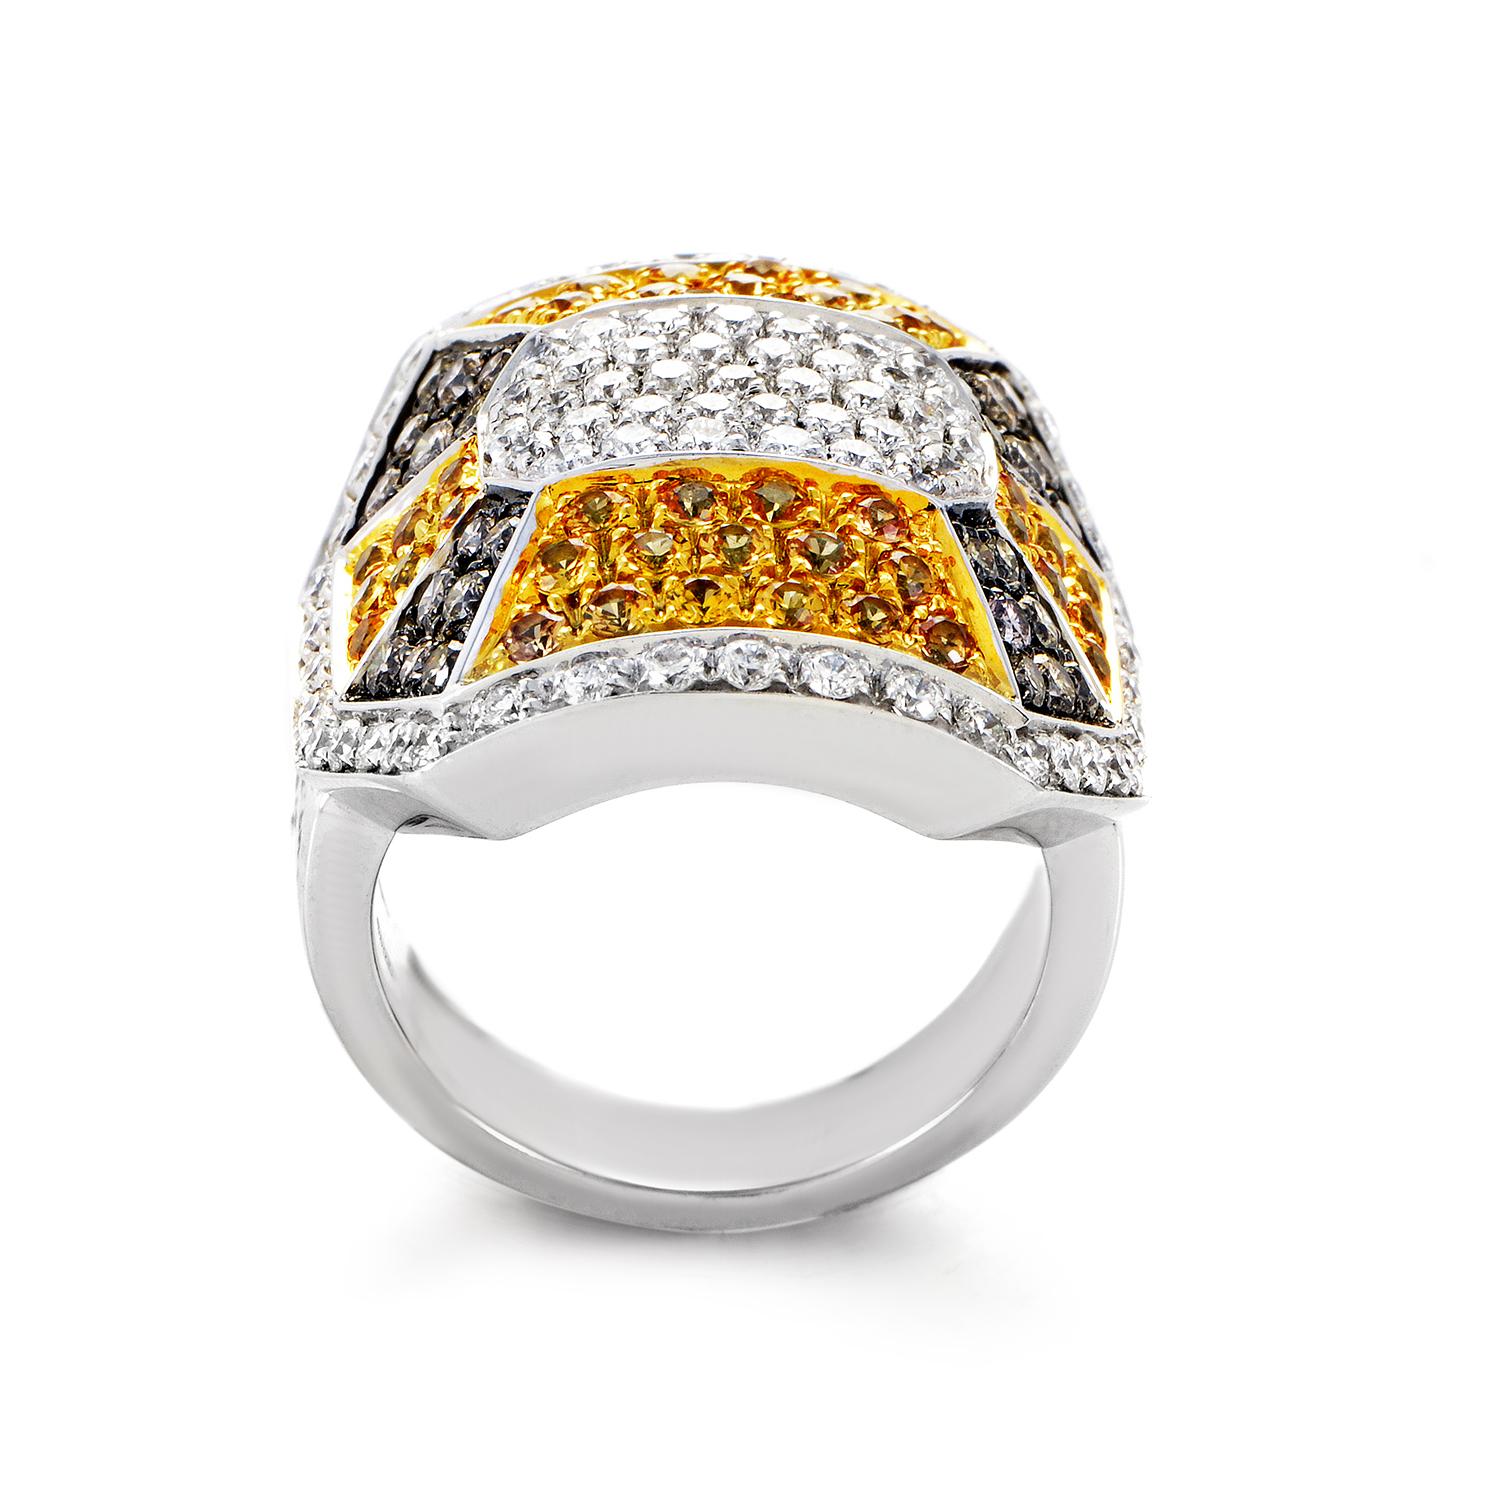 A magnificent arrangement of 2.01 carats of glittering diamonds and 1.62 carats of gorgeous yellow sapphires graces this amazing 18K white gold ring from Oro Trend with an exceptional aesthetic effect and irresistible allure.
